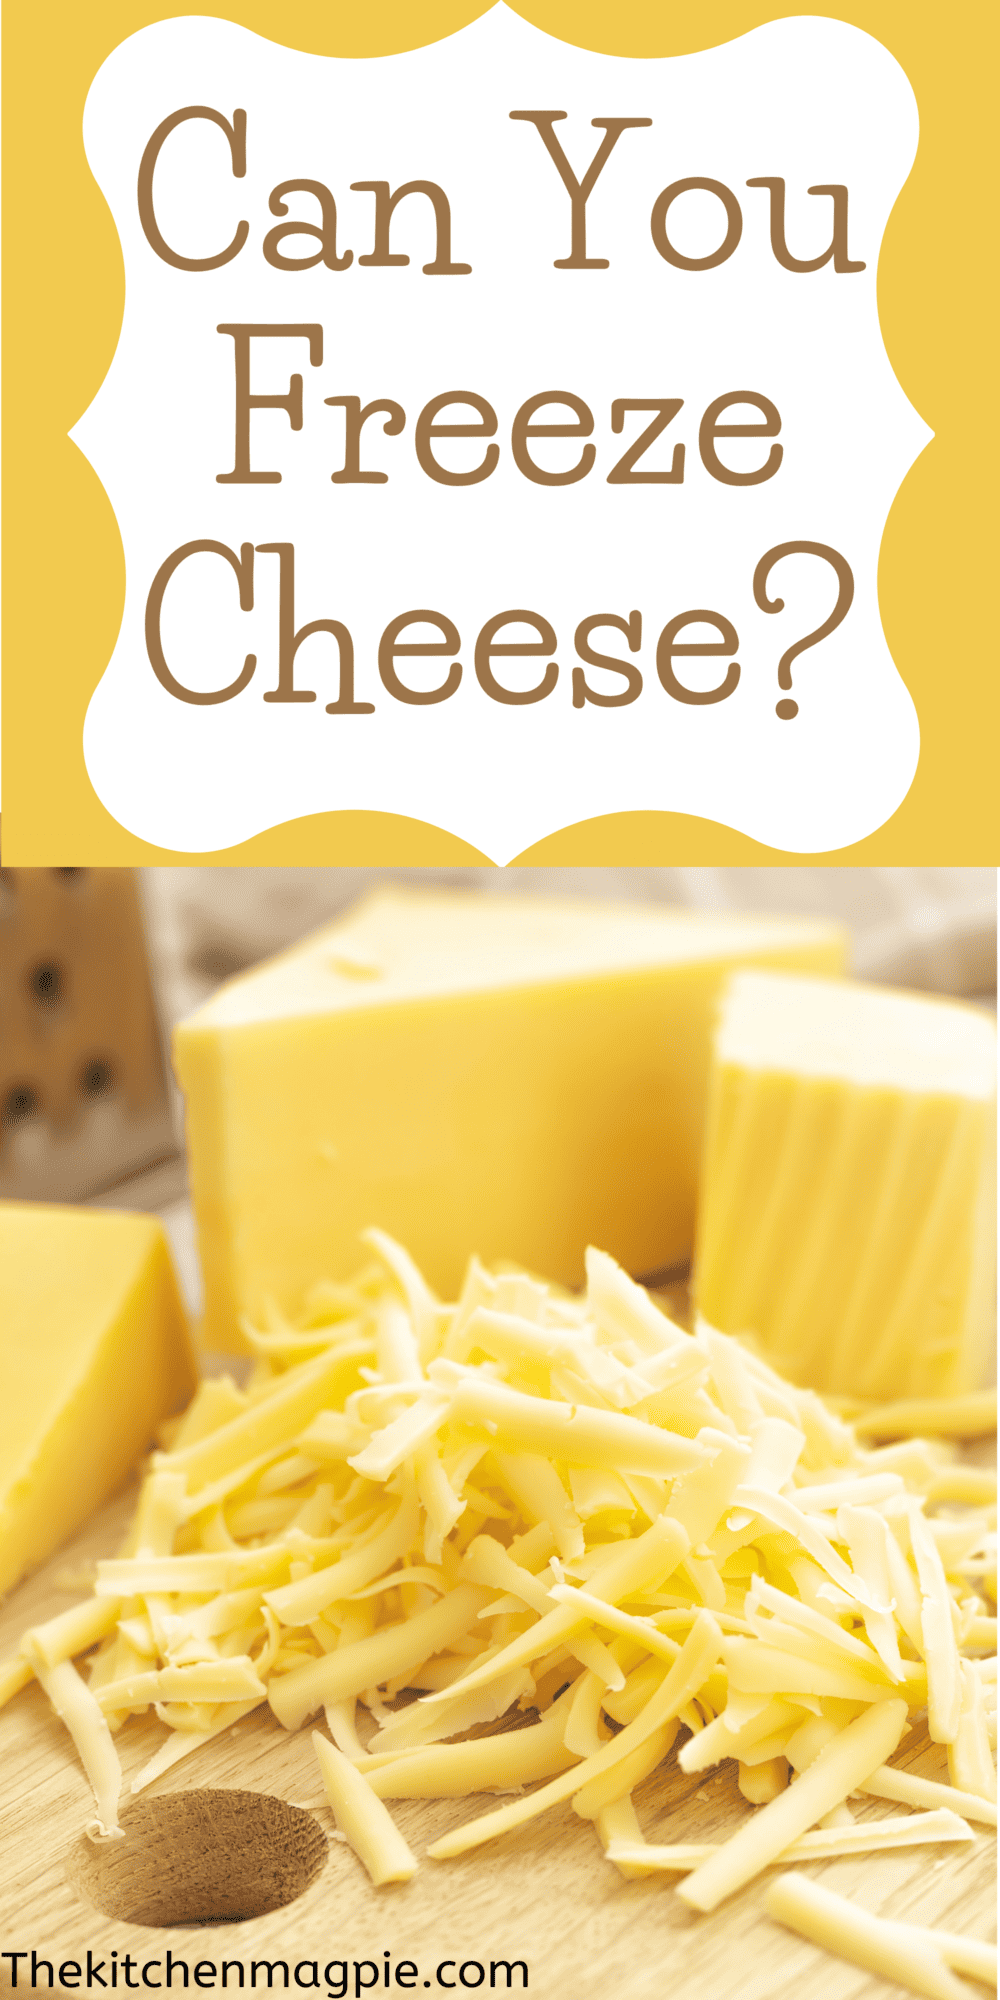 Can You Freeze Cheese, and Should You?